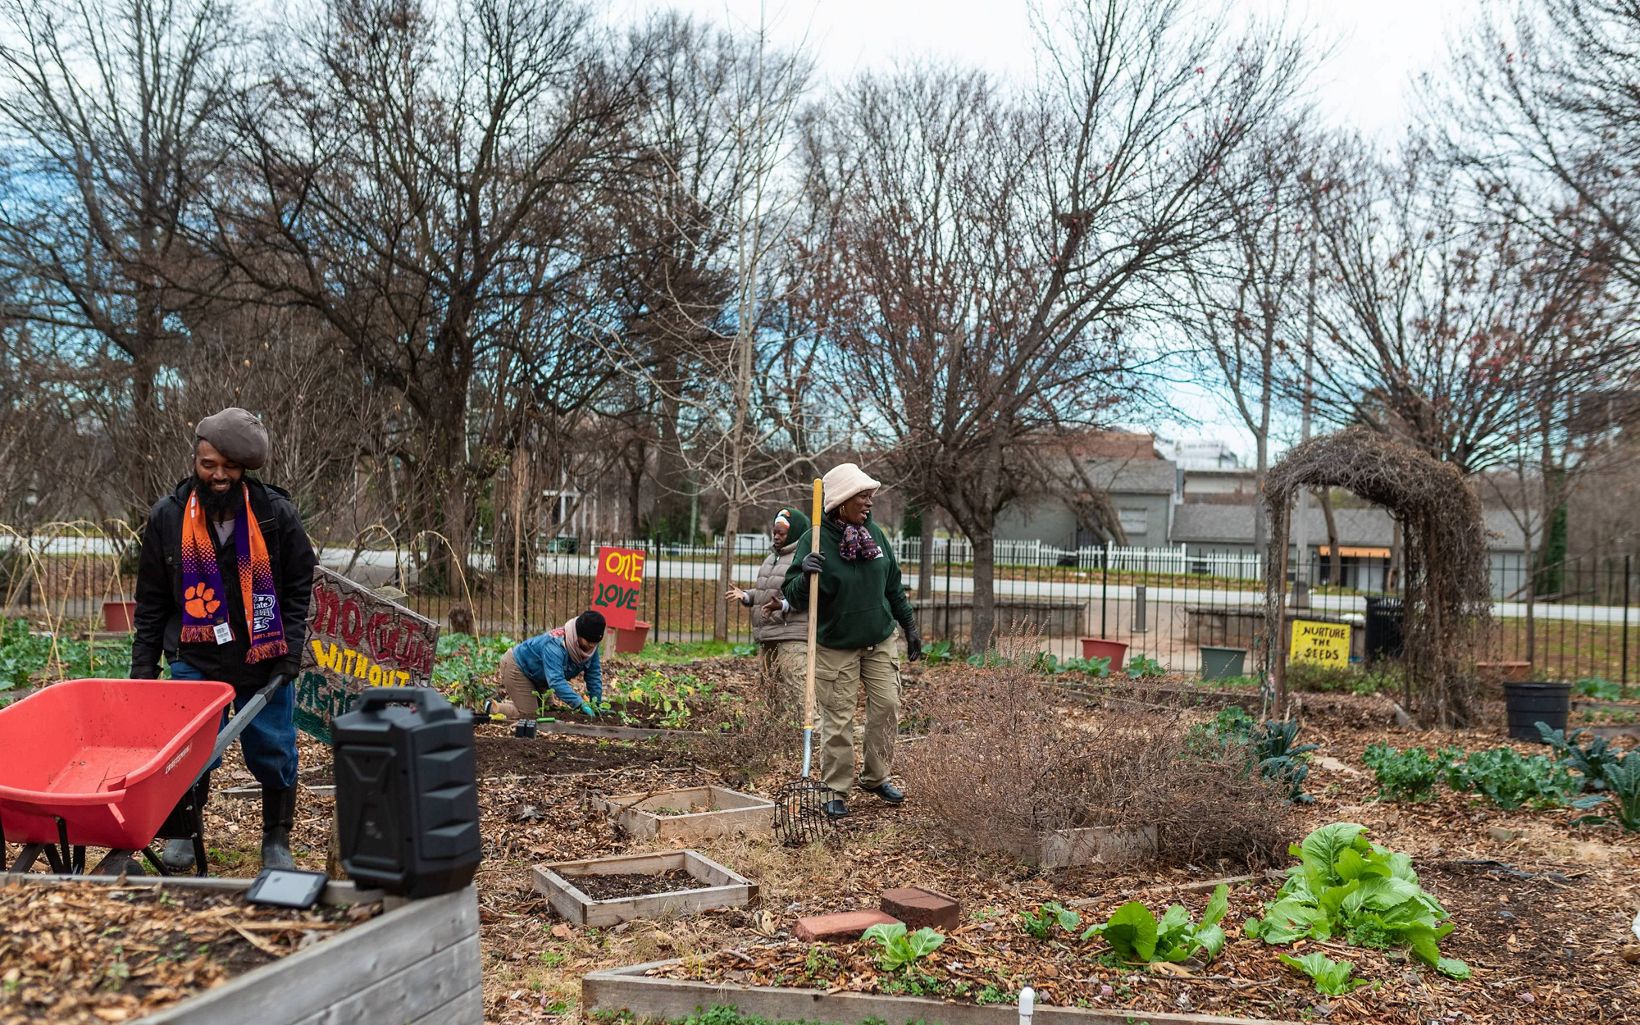 
                
                  TRAINING ON THE LAND Members of HABESHA work at Habesha Gardens in Atlanta, Georgia. December 2019. The Nature Conservancy has partnered with HABESHA in Atlanta to form the Urban Green Jobs program which trains residents for jobs that support green infrastructure.
                  © Lynsey Weatherspoon
                
              